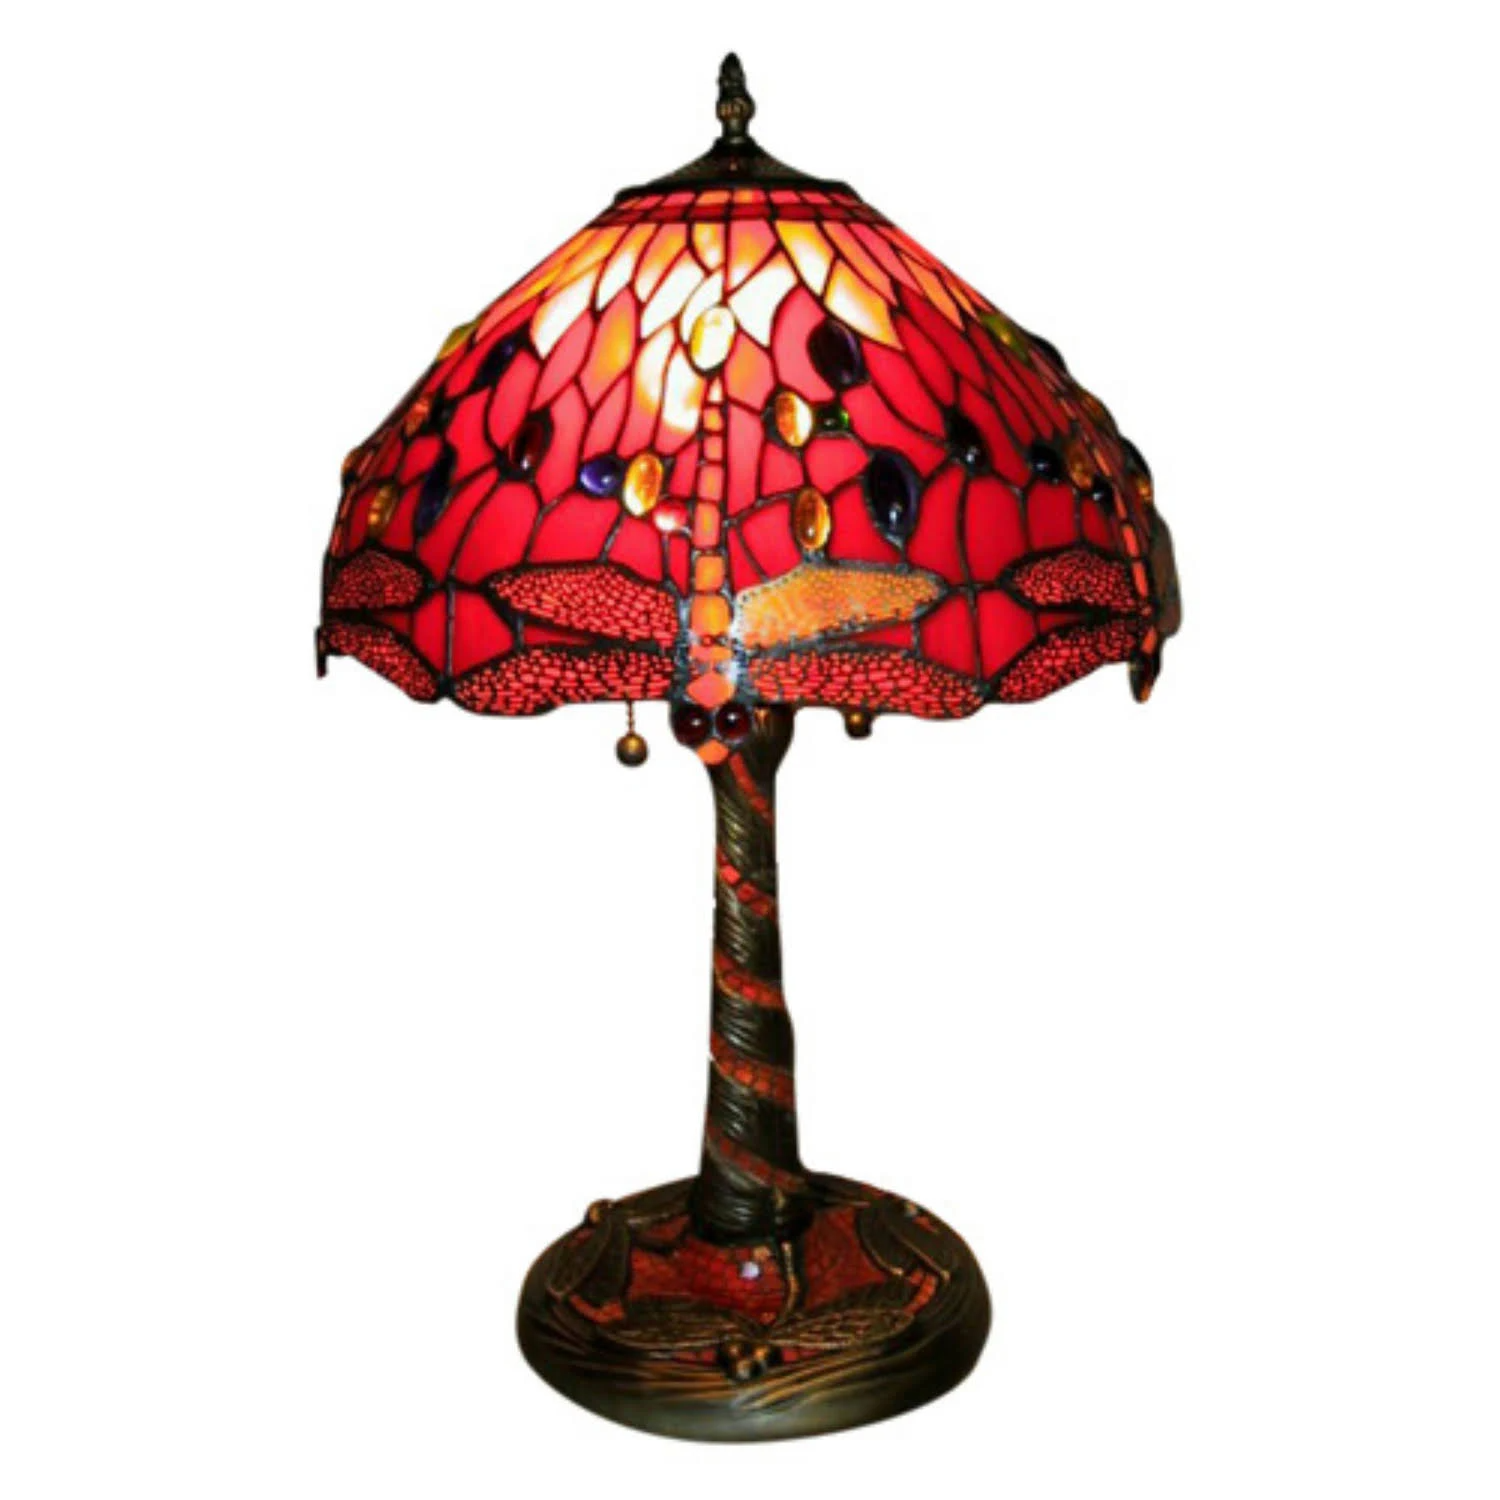 Handcrafted Amber Dragonfly Table Lamp